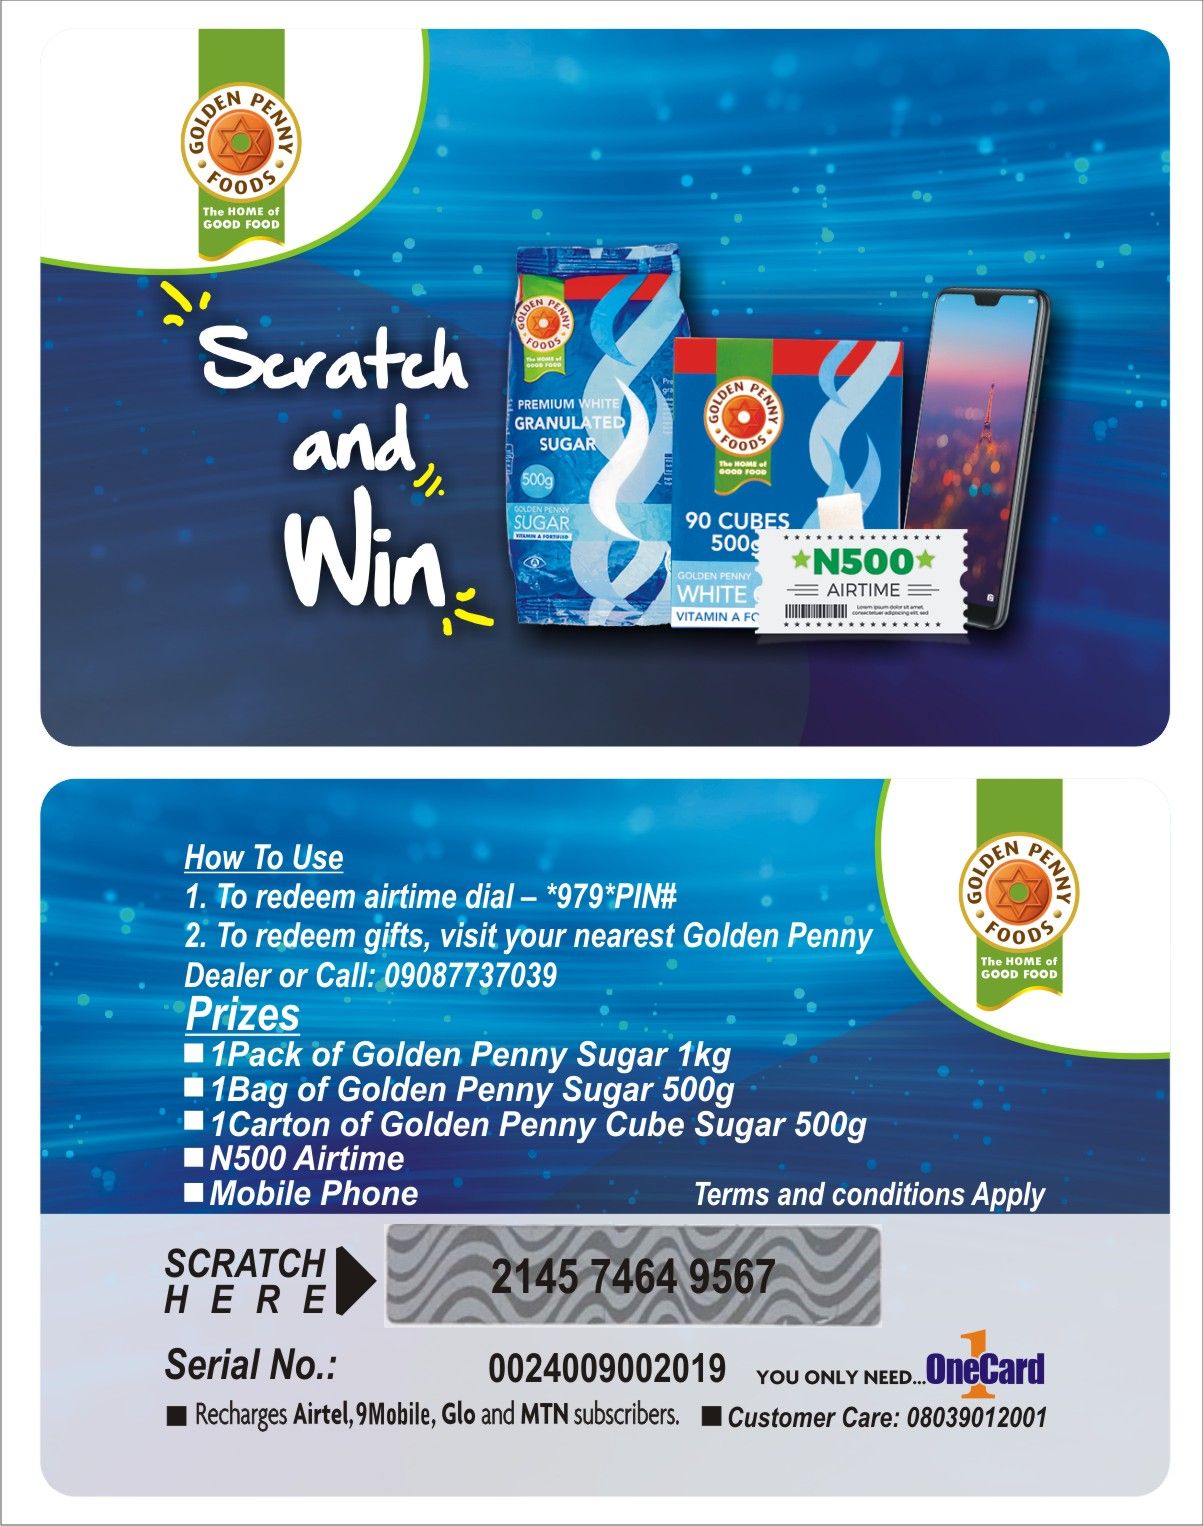 CALL CHINEDU ON 08179651585 TO PRINT SCRATCH AND WIN PROMO CARDS, RESULT CHECKER CARDS , ETC